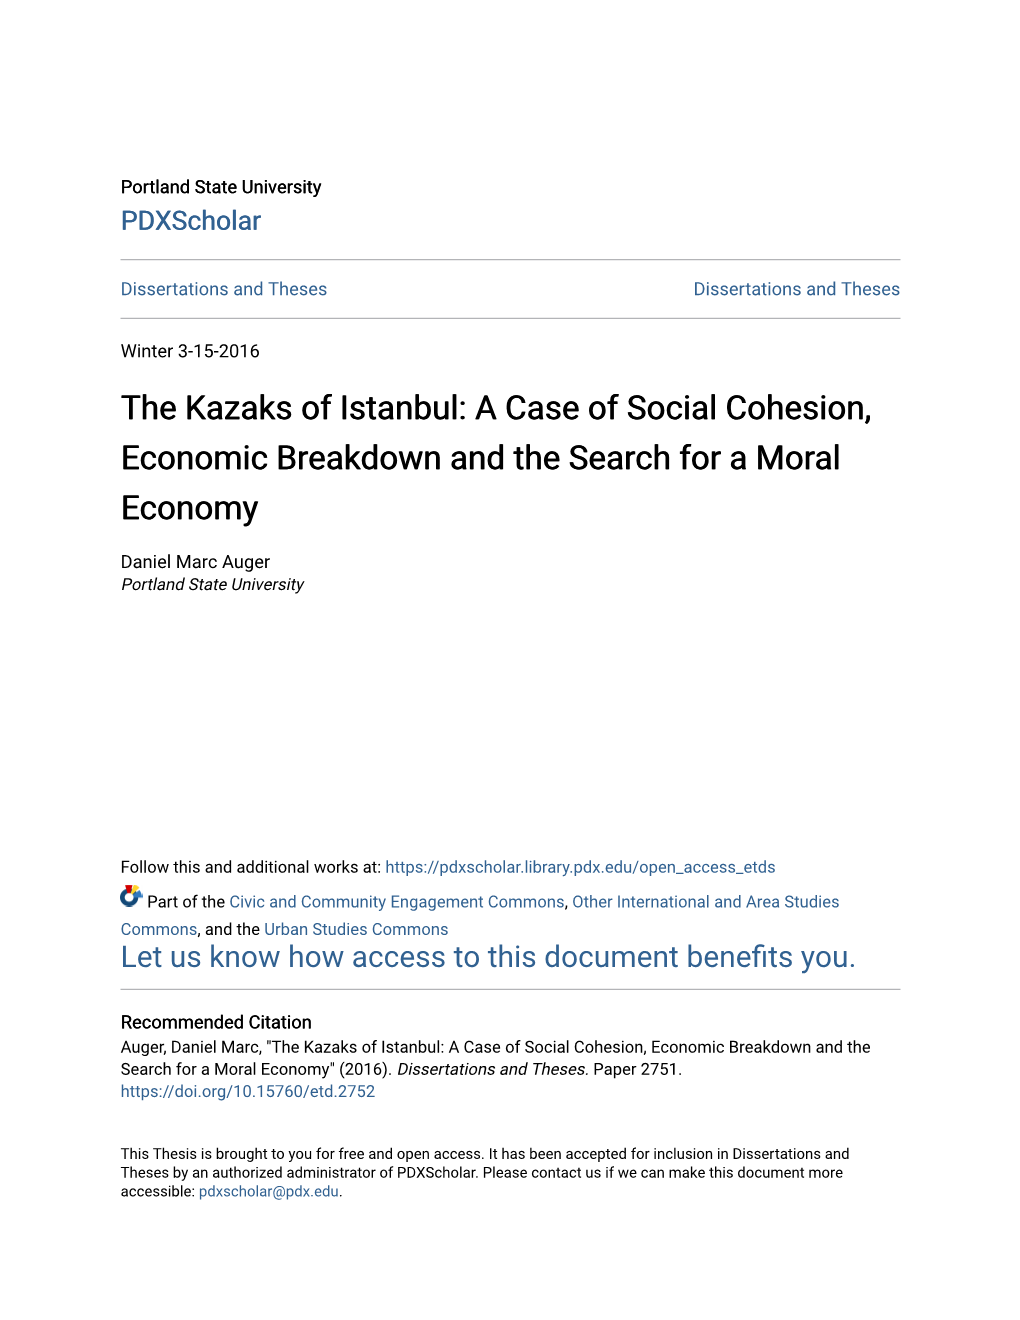 The Kazaks of Istanbul: a Case of Social Cohesion, Economic Breakdown and the Search for a Moral Economy